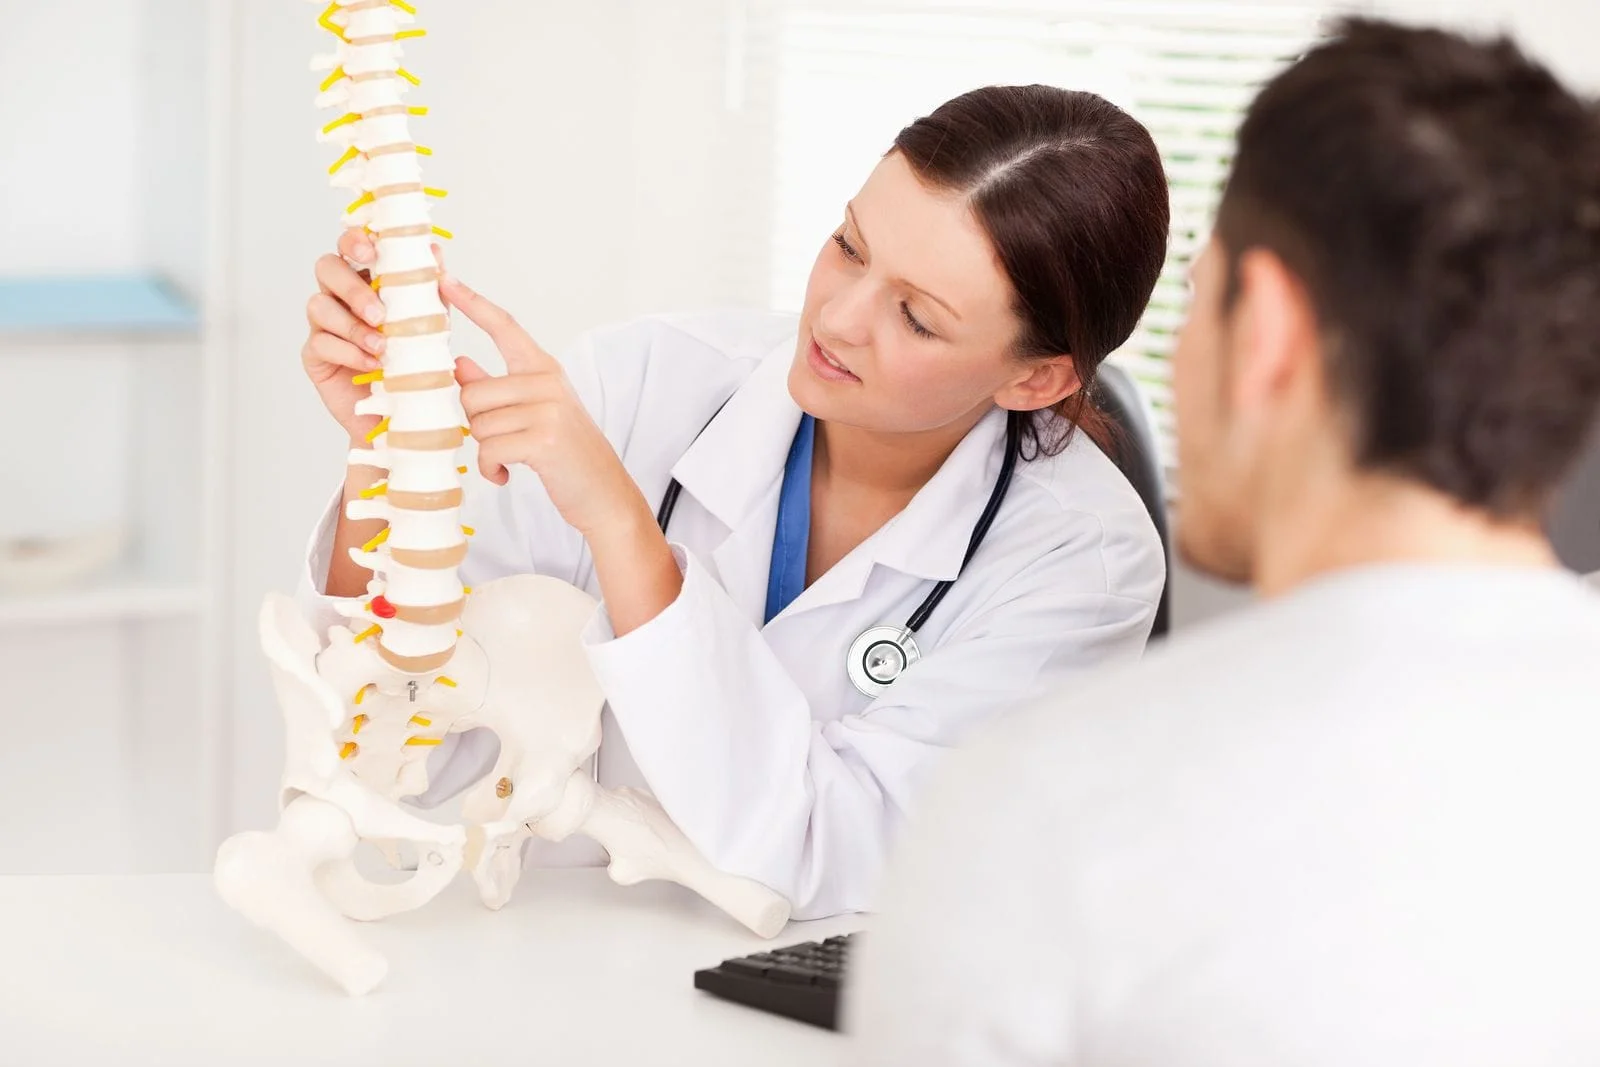 extremity conditions treated by your chiropractor in bangor and brewer